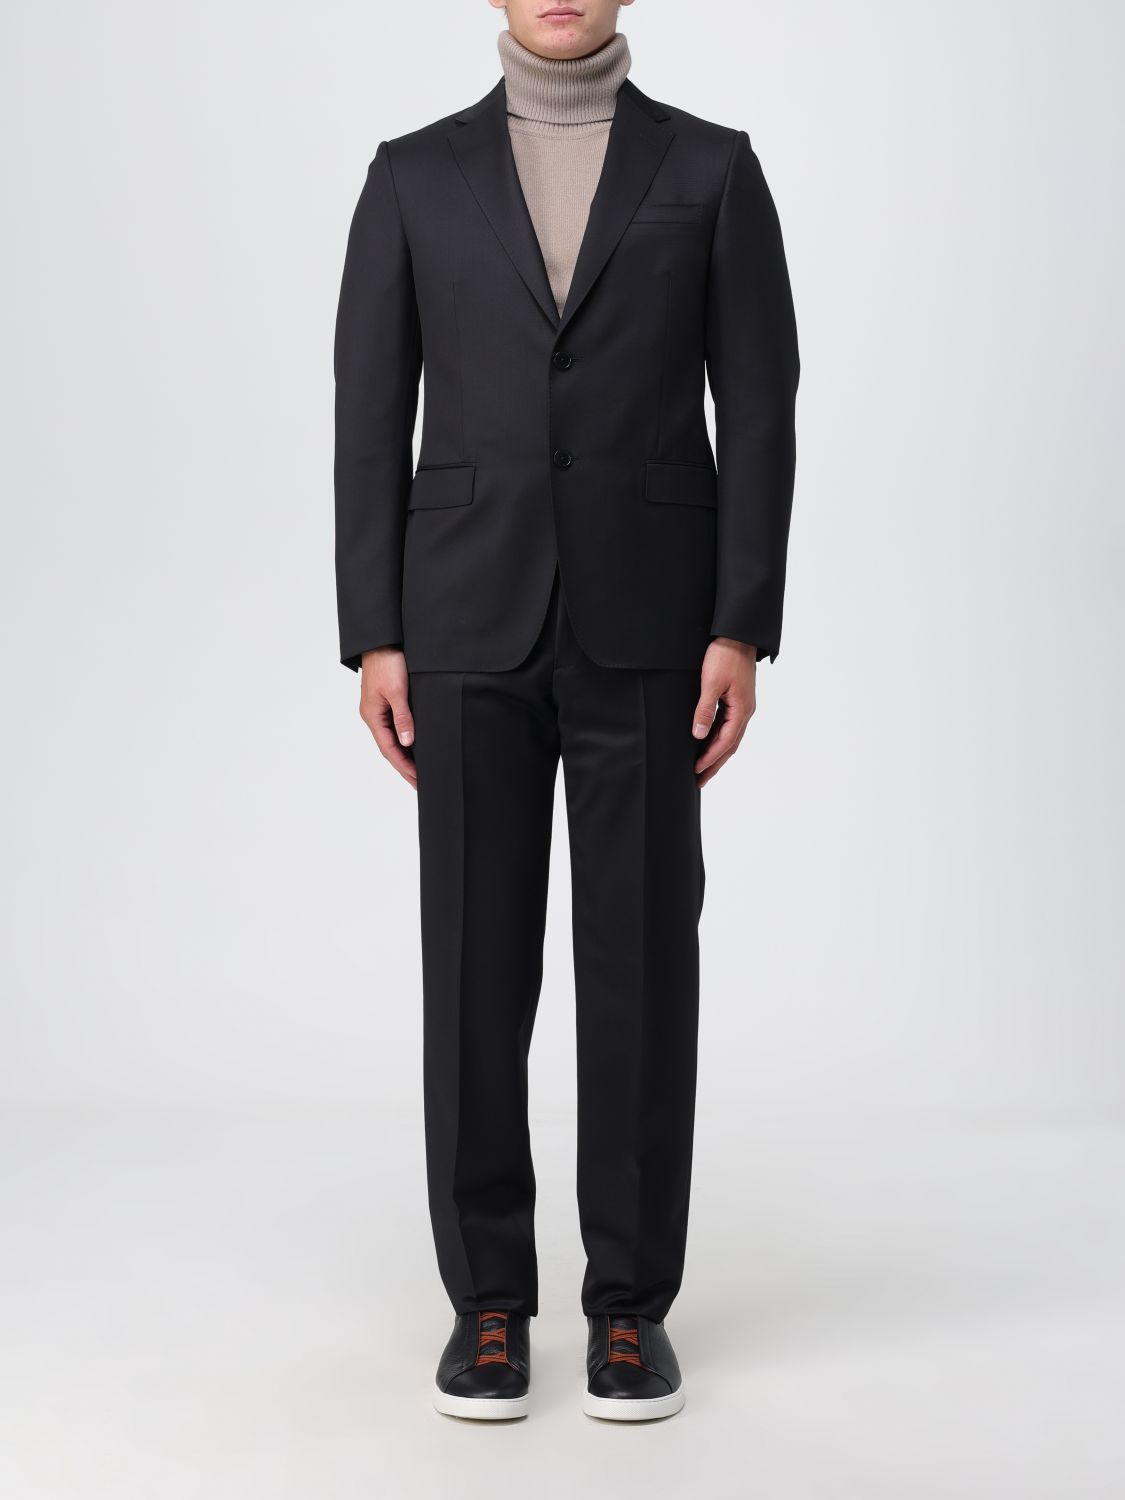 Zegna Suit In Wool And Mohair In Black